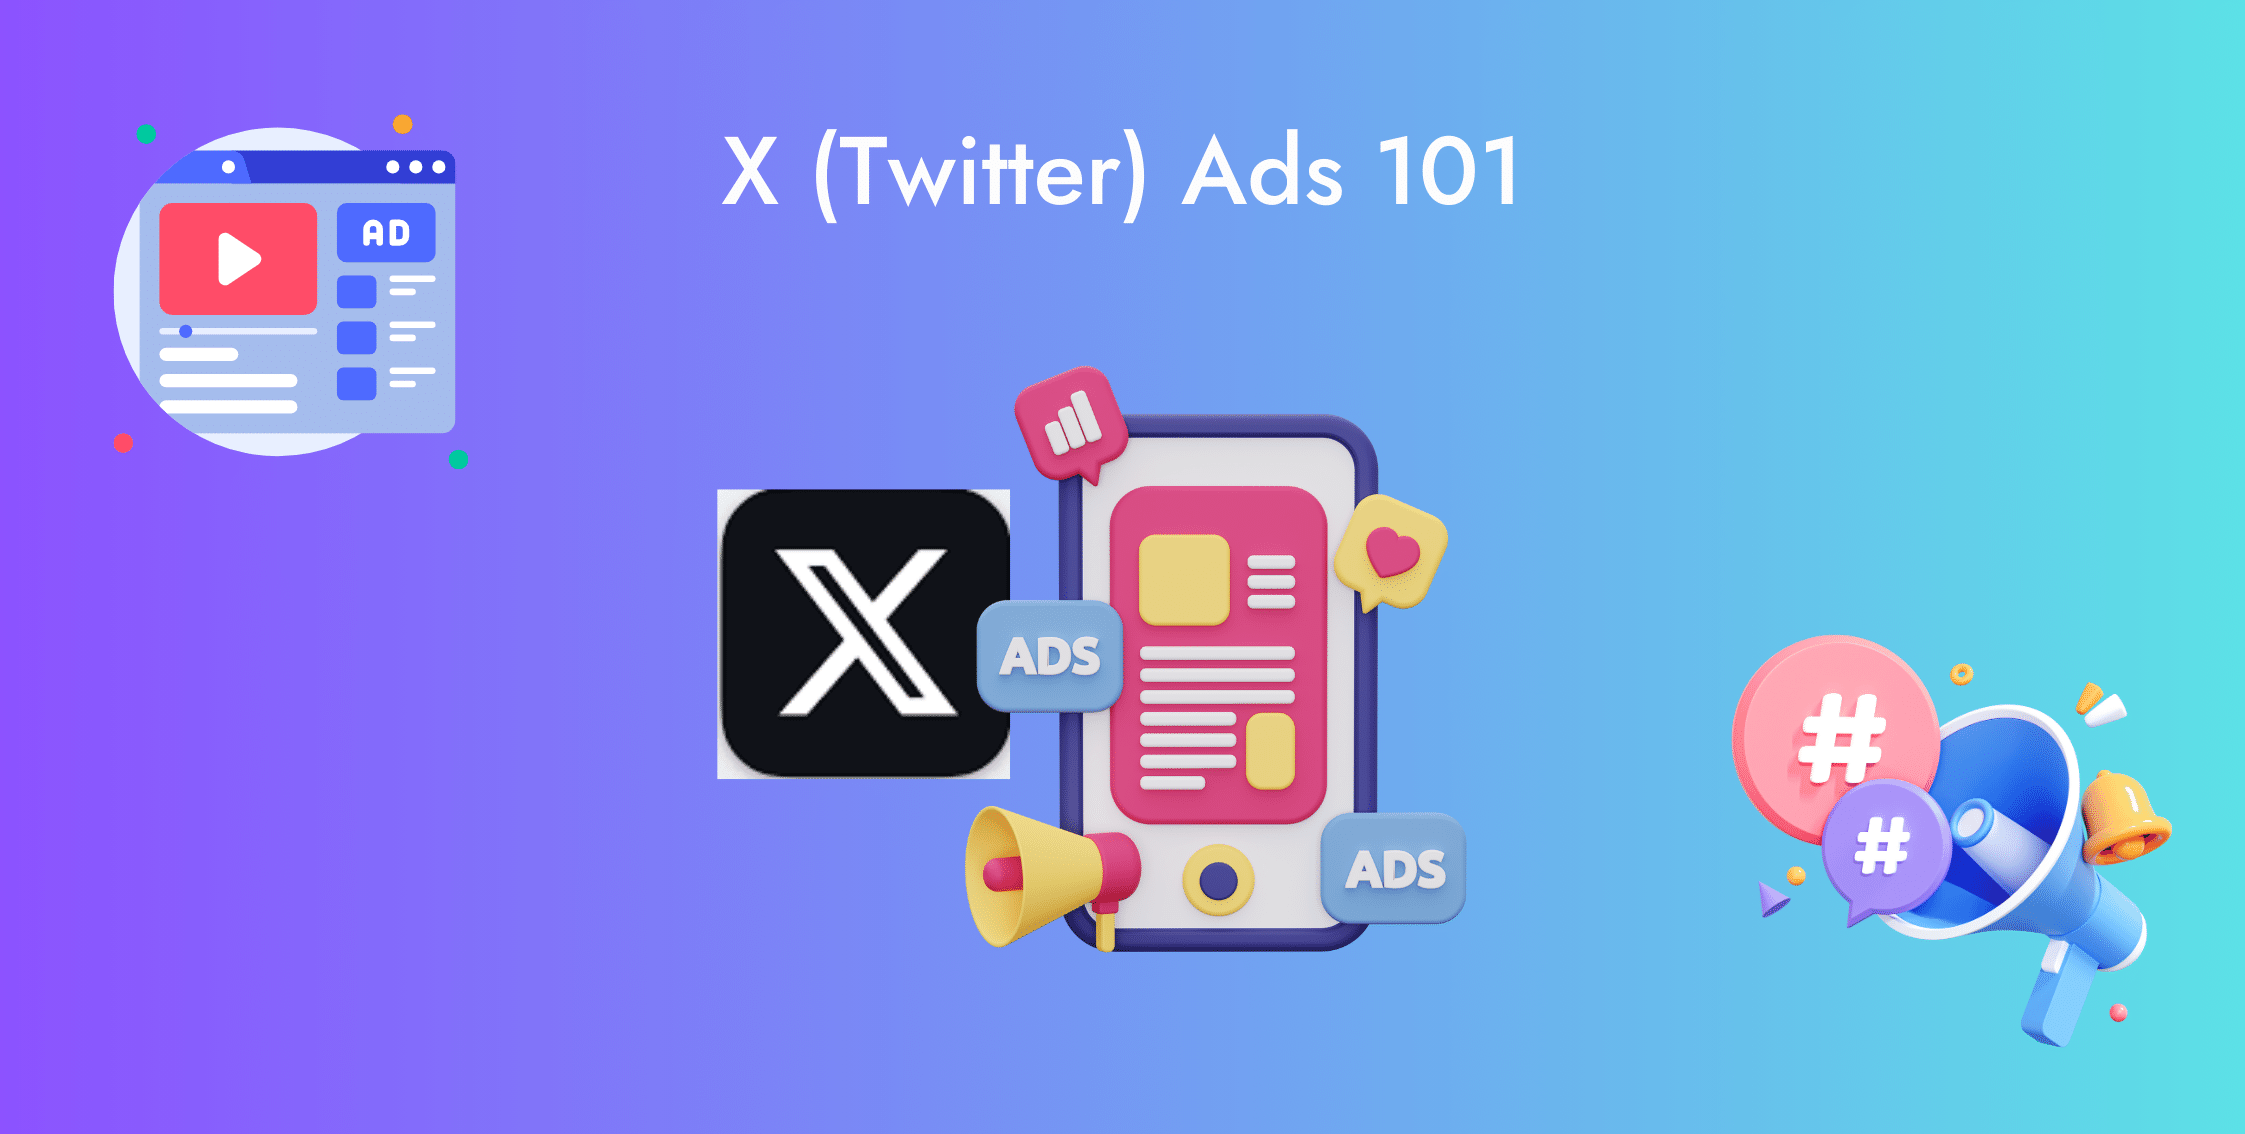 X (Twitter) Advertising 101: Building Campaigns for B2C Markets